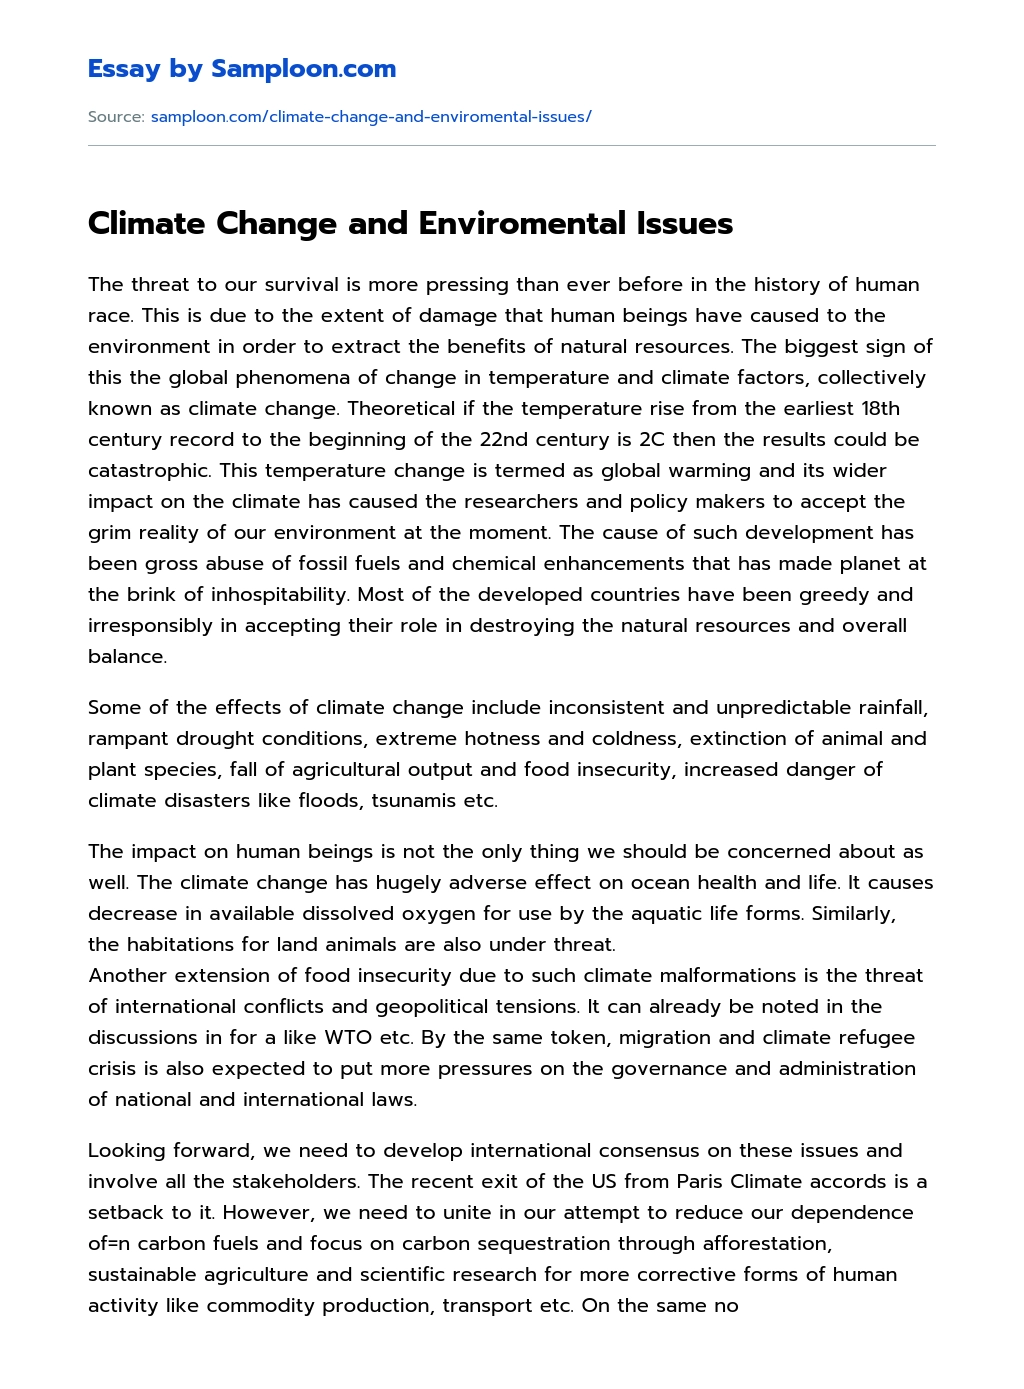 Climate Change and Enviromental Issues Argumentative Essay essay